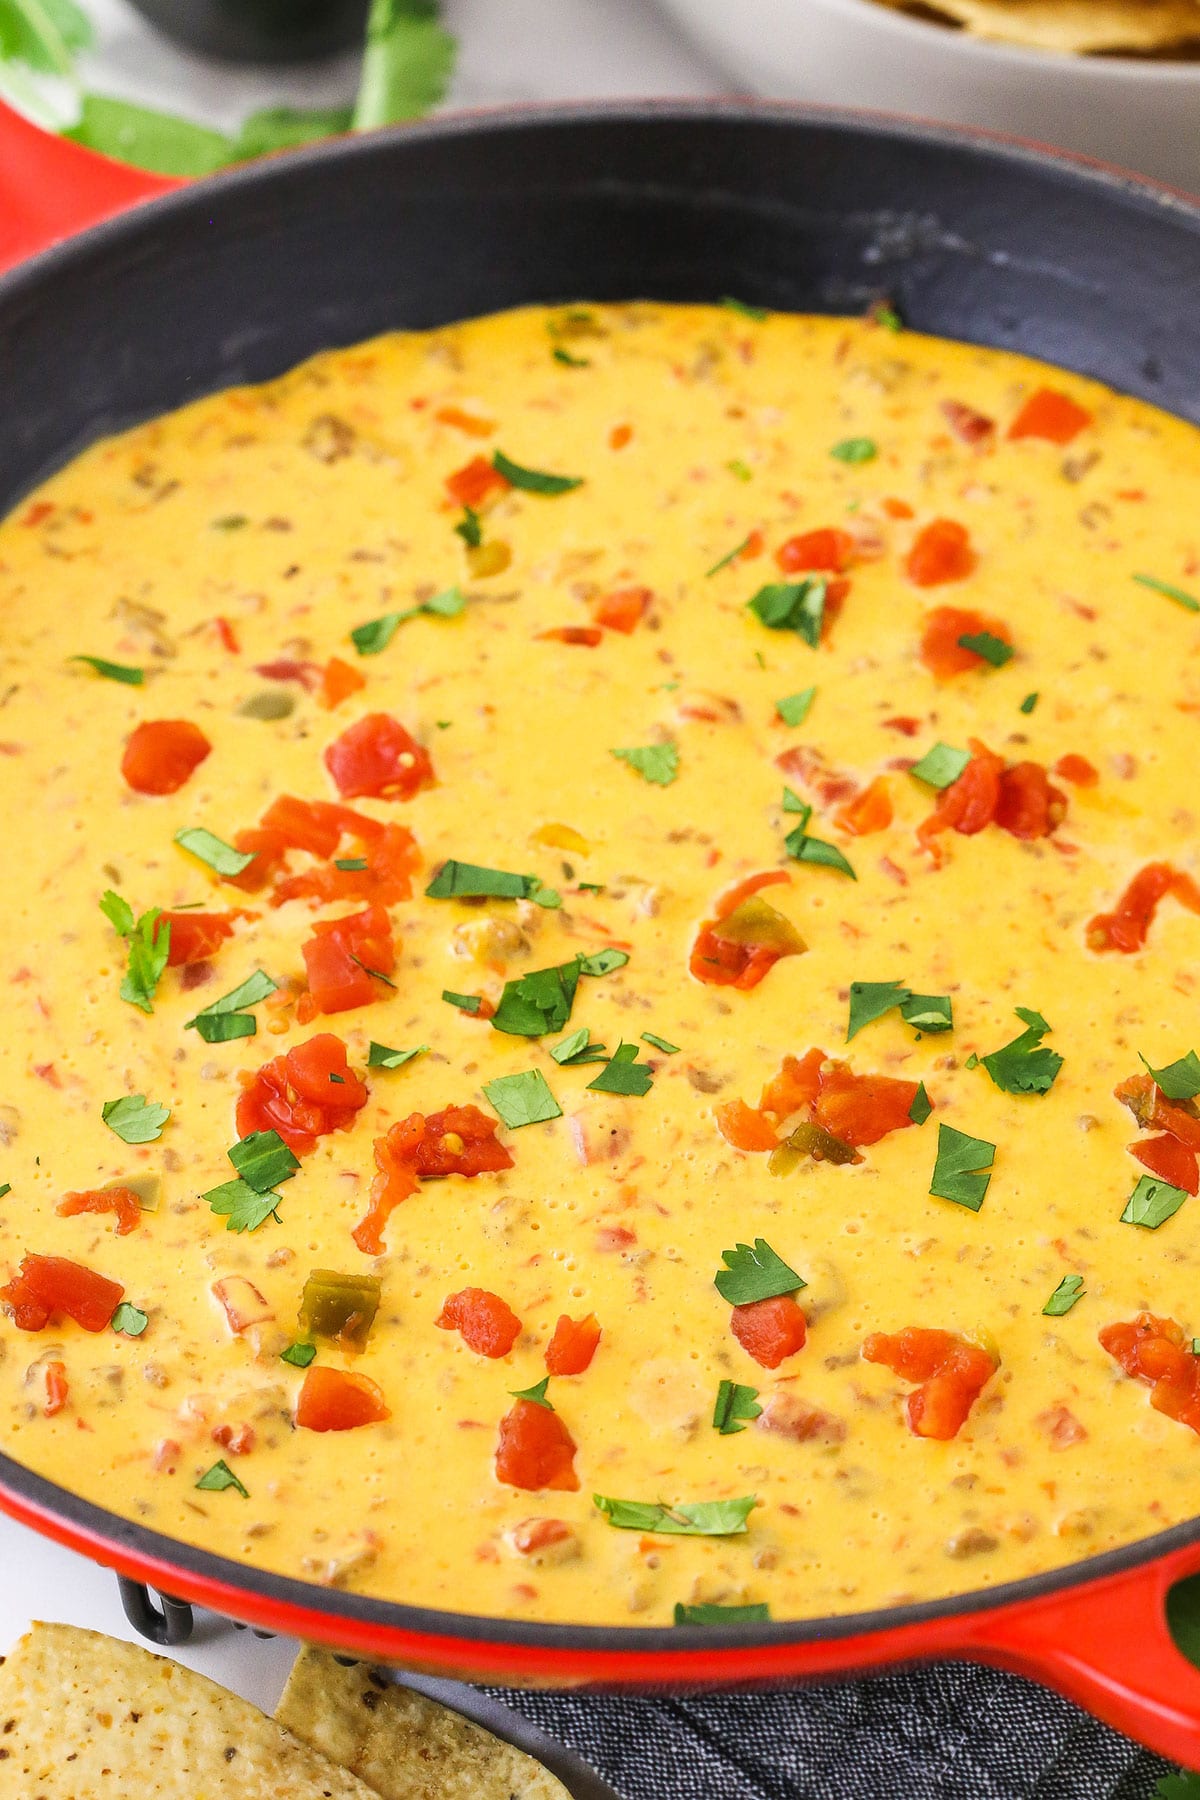 A cast-iron skillet with melted cheese dip inside.